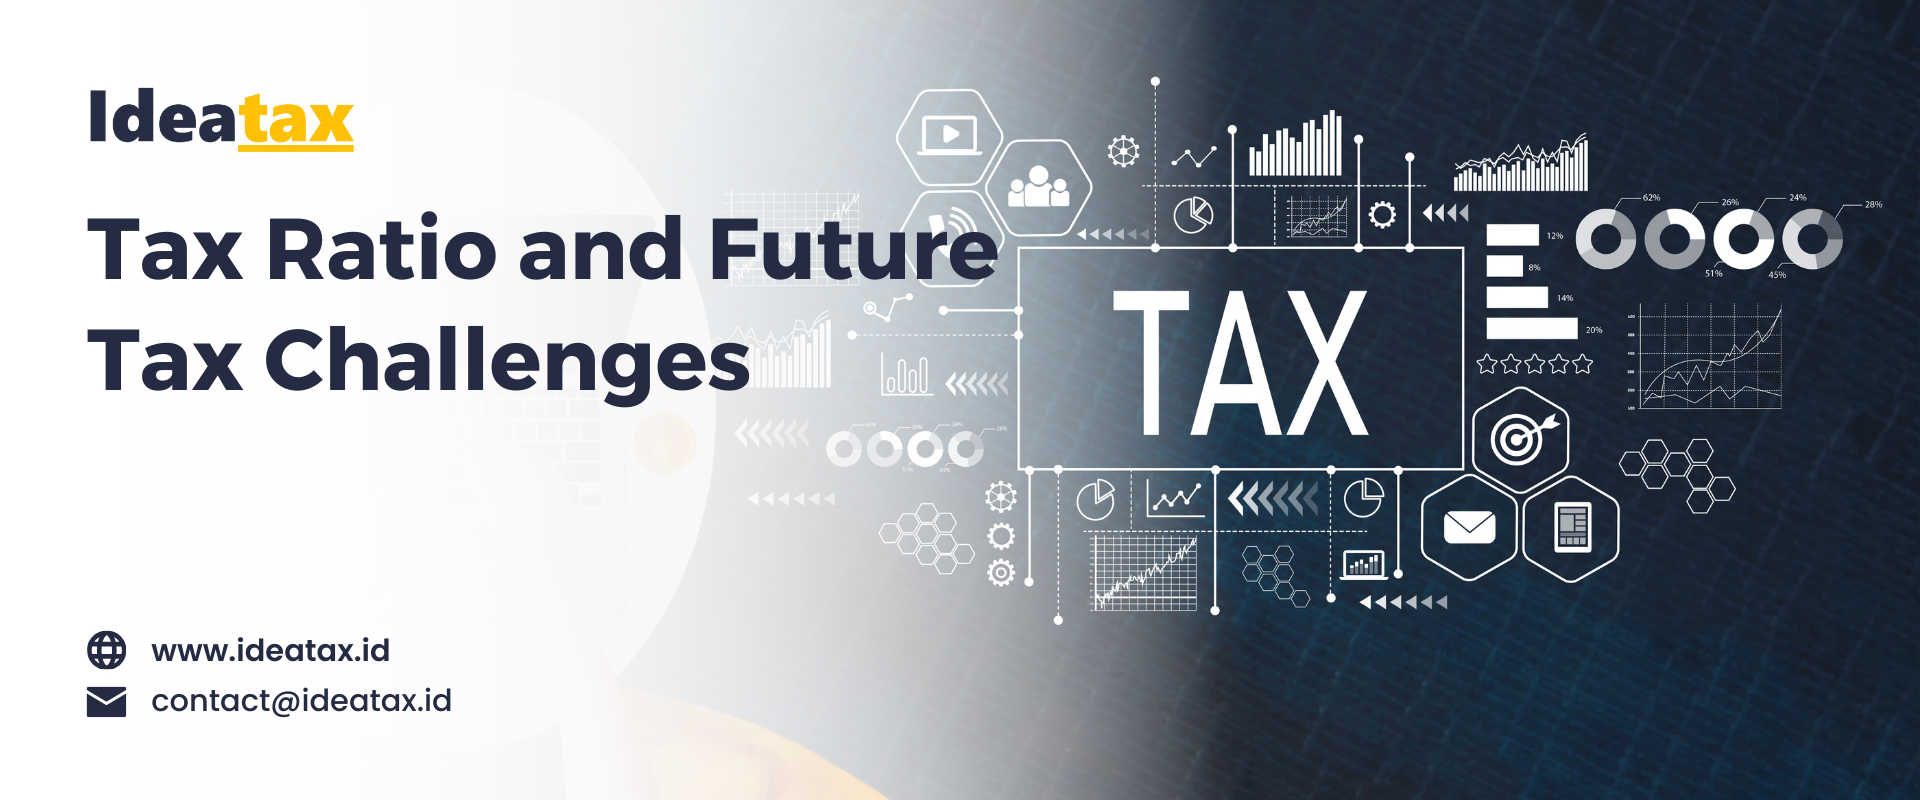 Tax Ratio and Future Tax Challenges